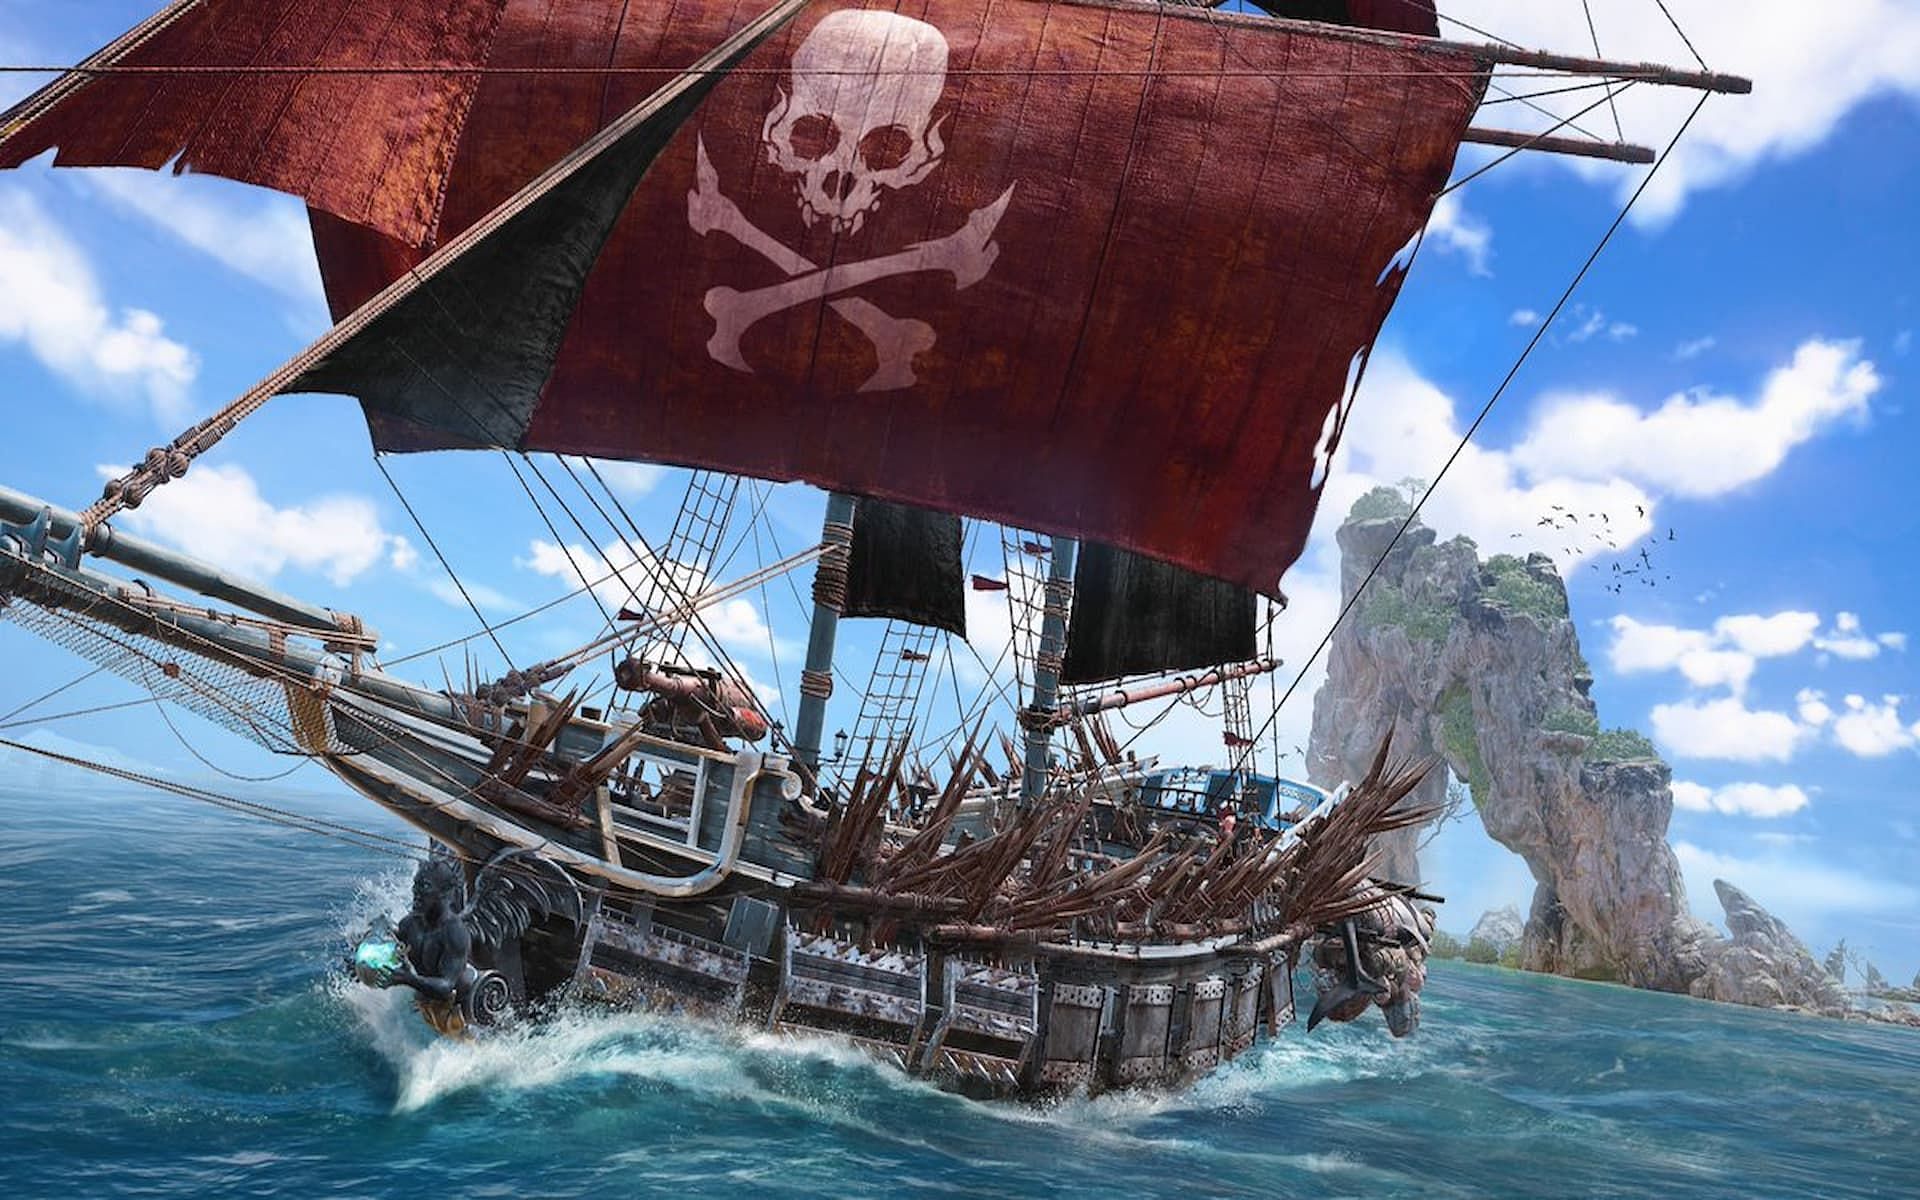 Sailing a ship is all a part of the pirate&#039;s life in Skull and Bones (Image via Ubisoft)